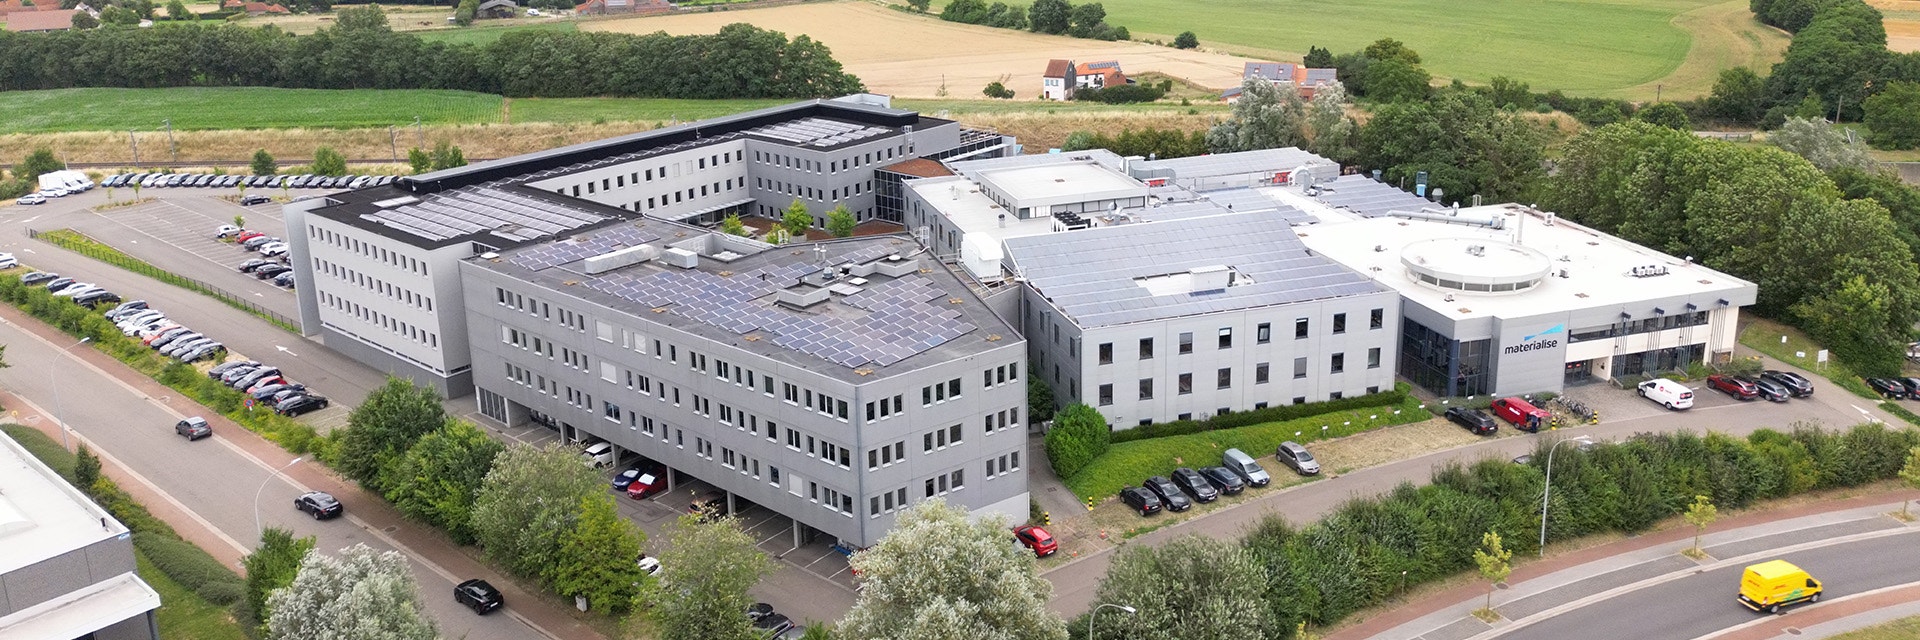 A bird's-eye view of Materialise's headquarters in Leuven, Belgium.